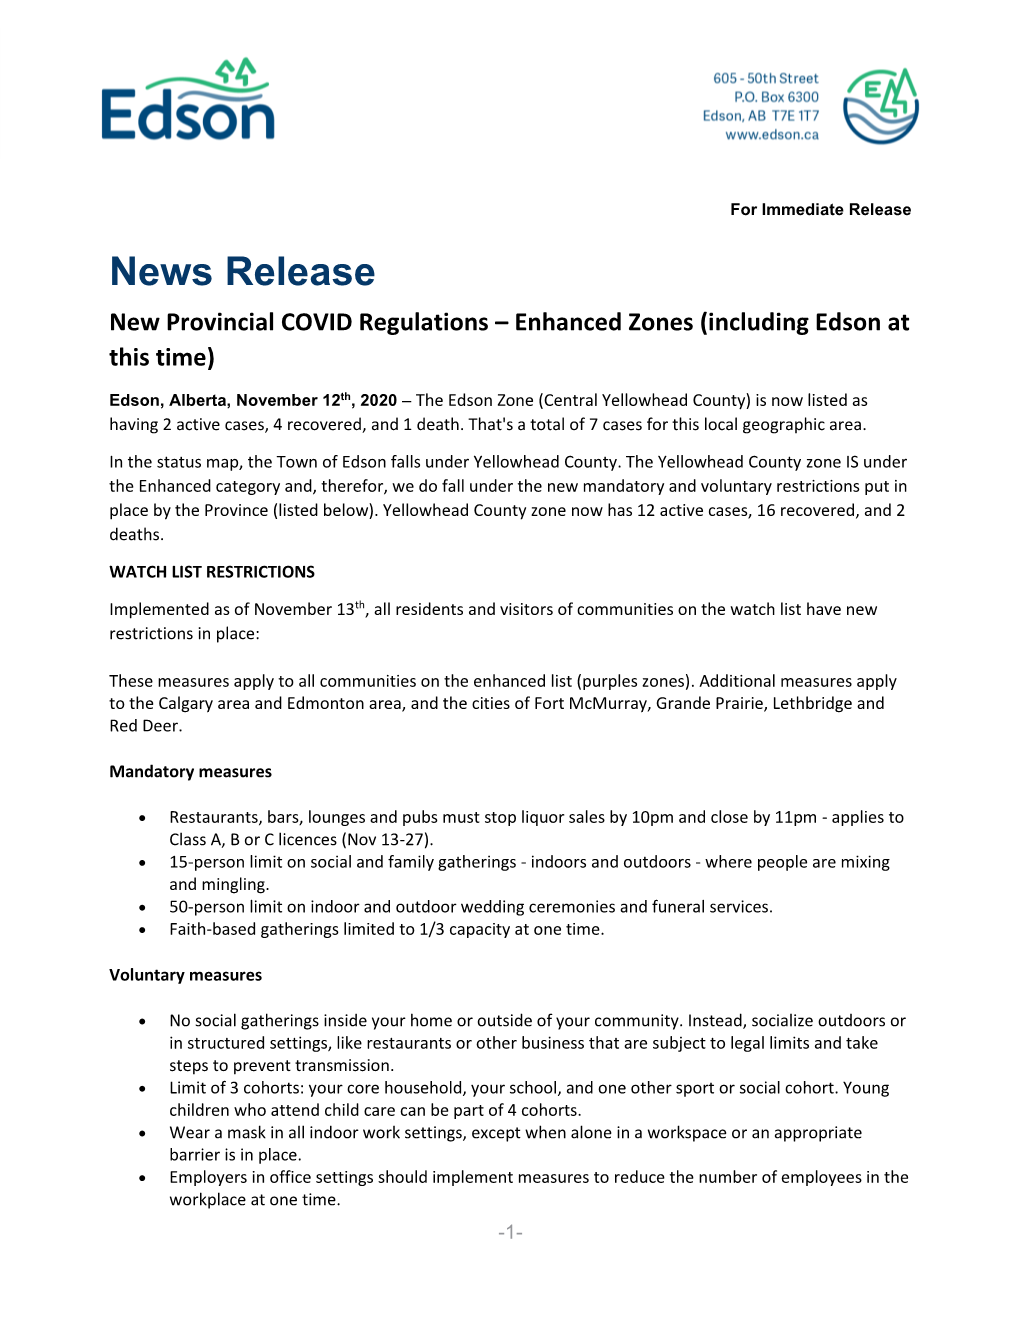 News Release New Provincial COVID Regulations – Enhanced Zones (Including Edson at This Time)